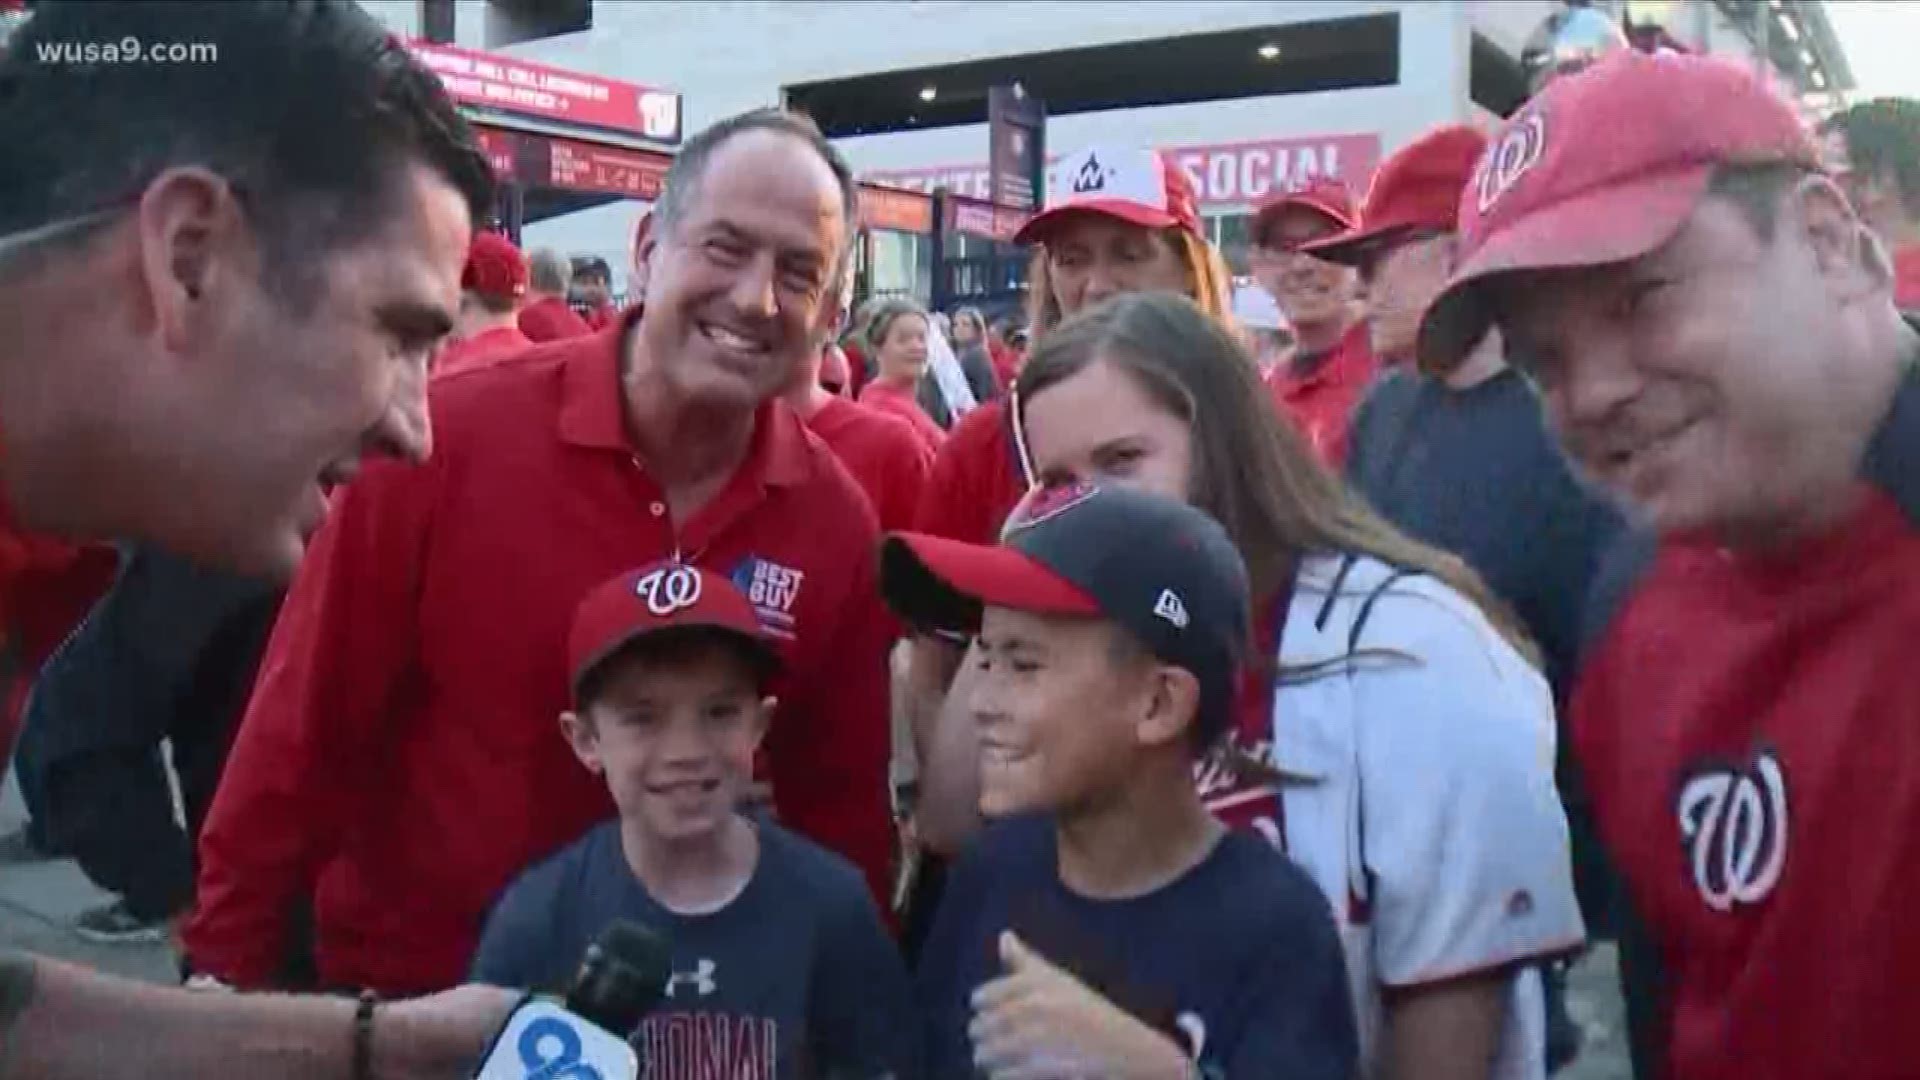 Cheers of Lets go Nats erupted outside Nats Park as fans filed into the stadium.